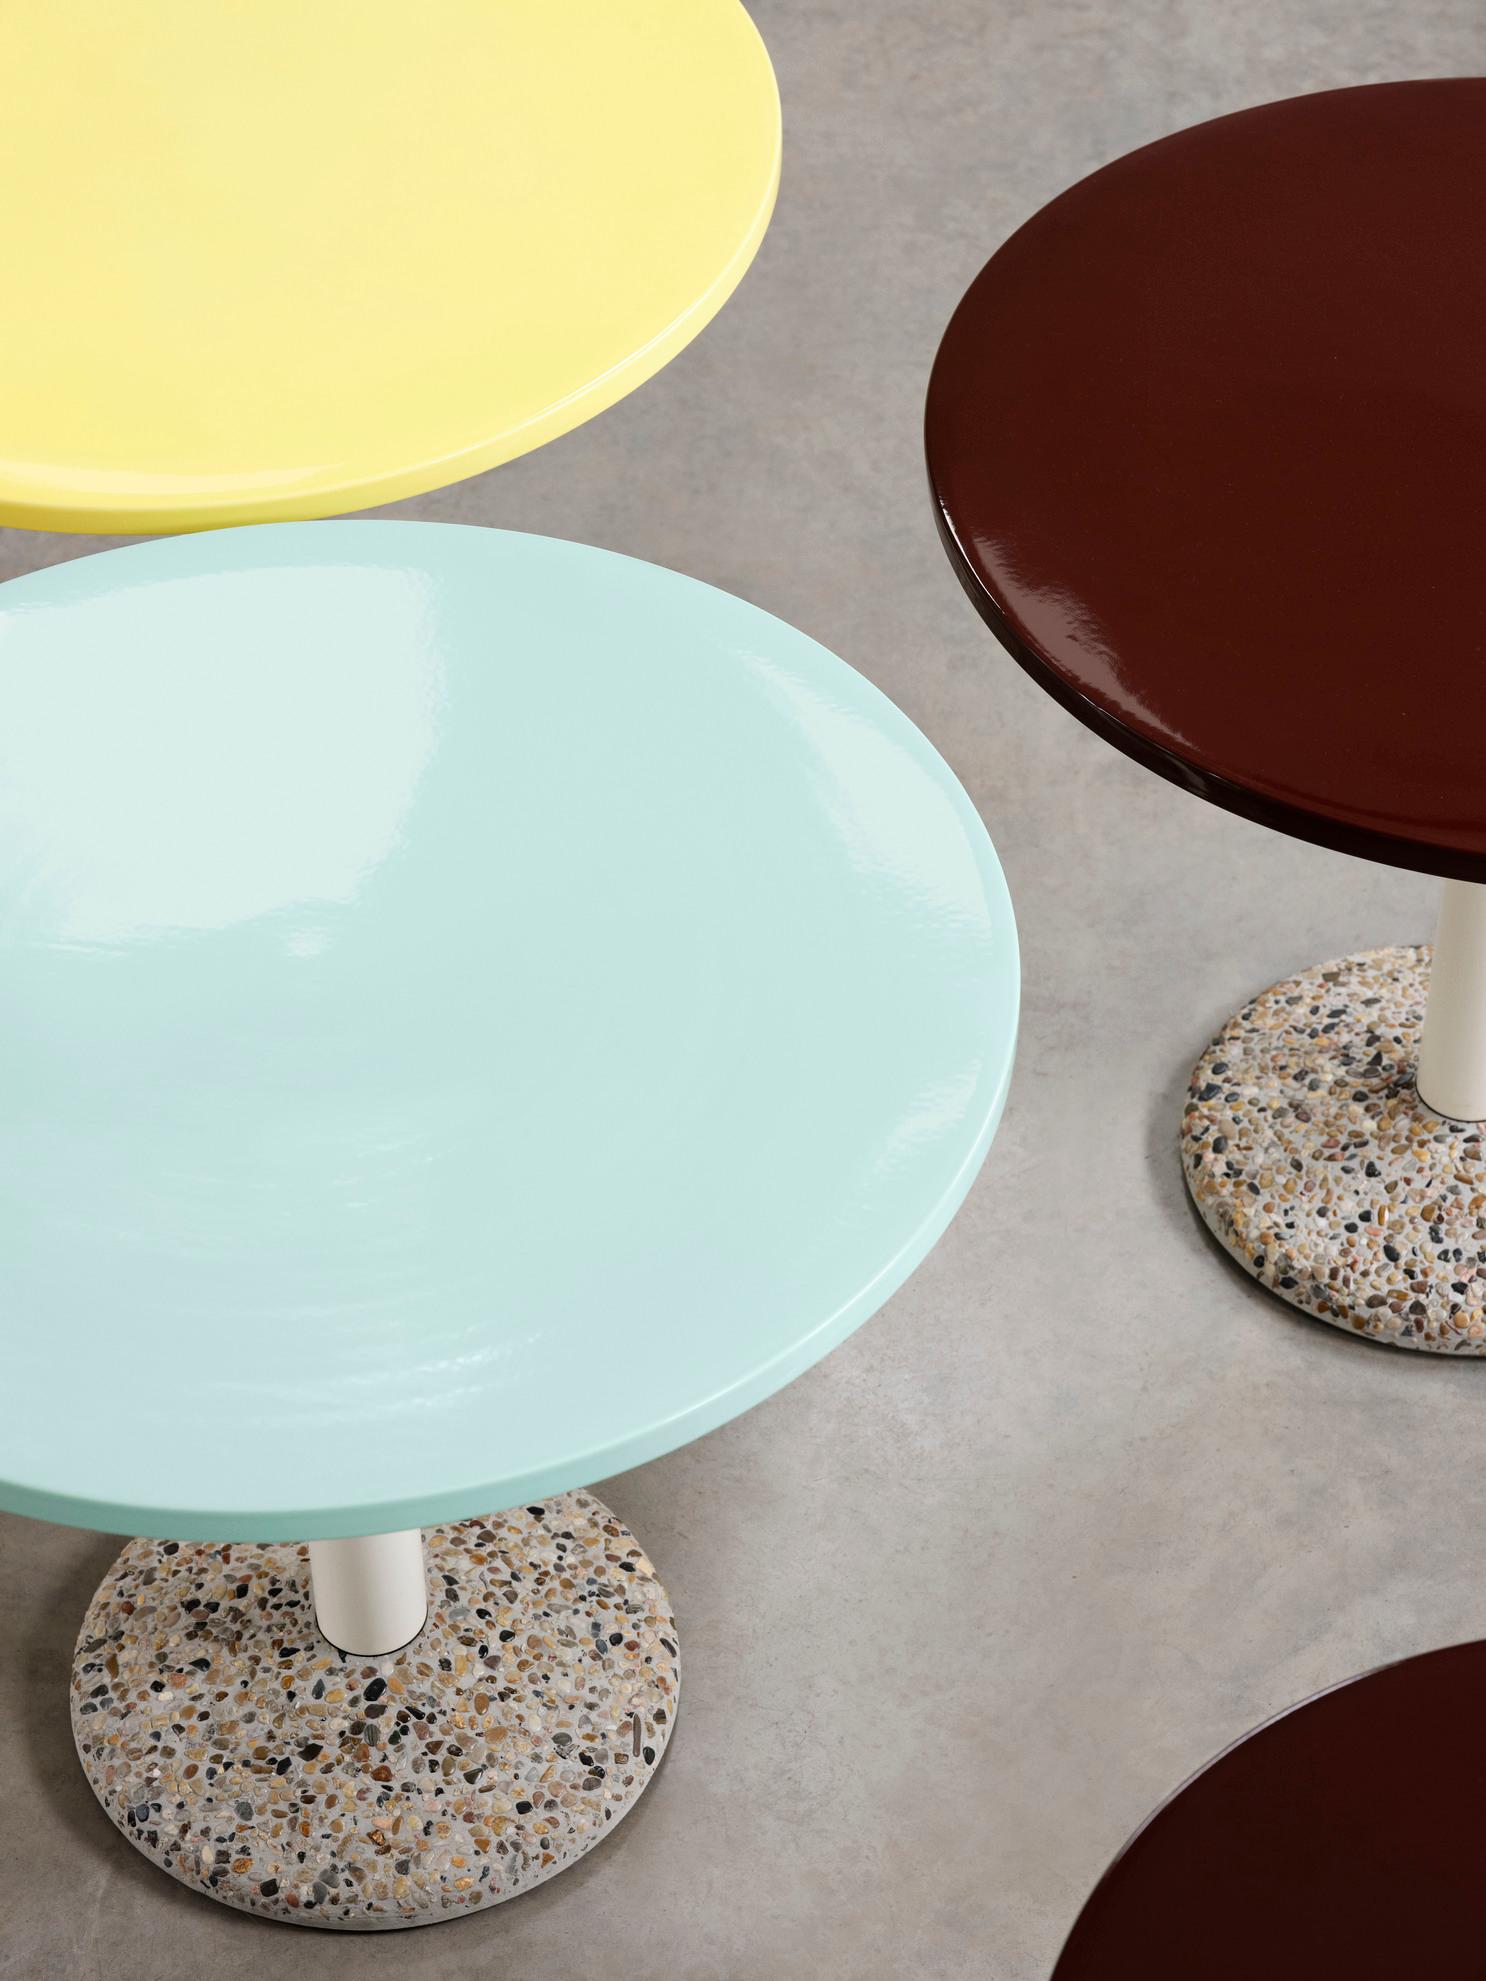 Powder-Coated Ceramic Table Ø70, Outdoor-Bright Yellow Porcelain-by Muller Van Severen for Hay For Sale